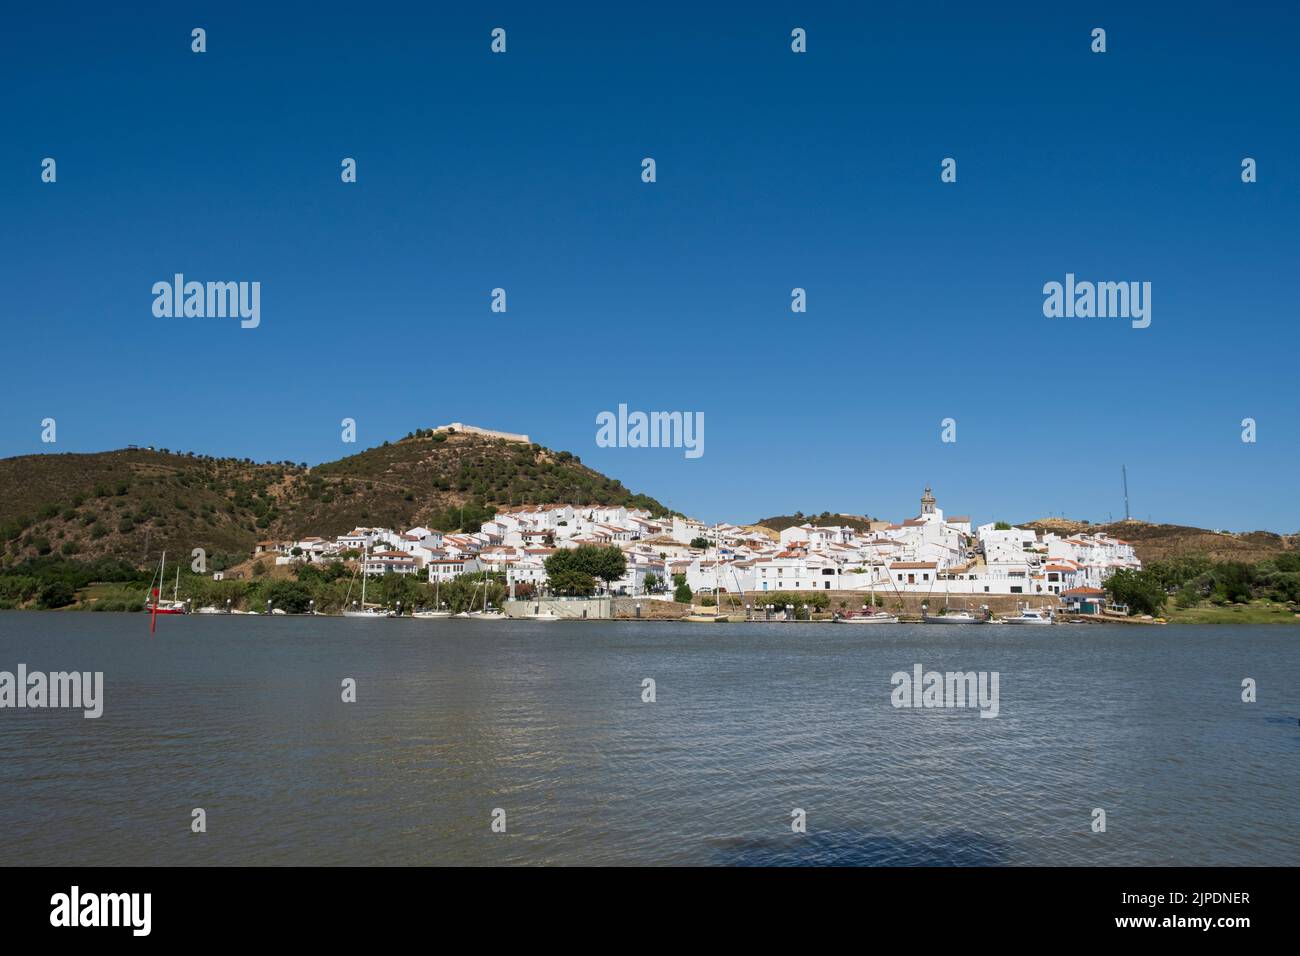 Spanish village of San Lucar de Guadiana on the Guadiana river seen from the Portuguese village of Alcoutim. Stock Photo